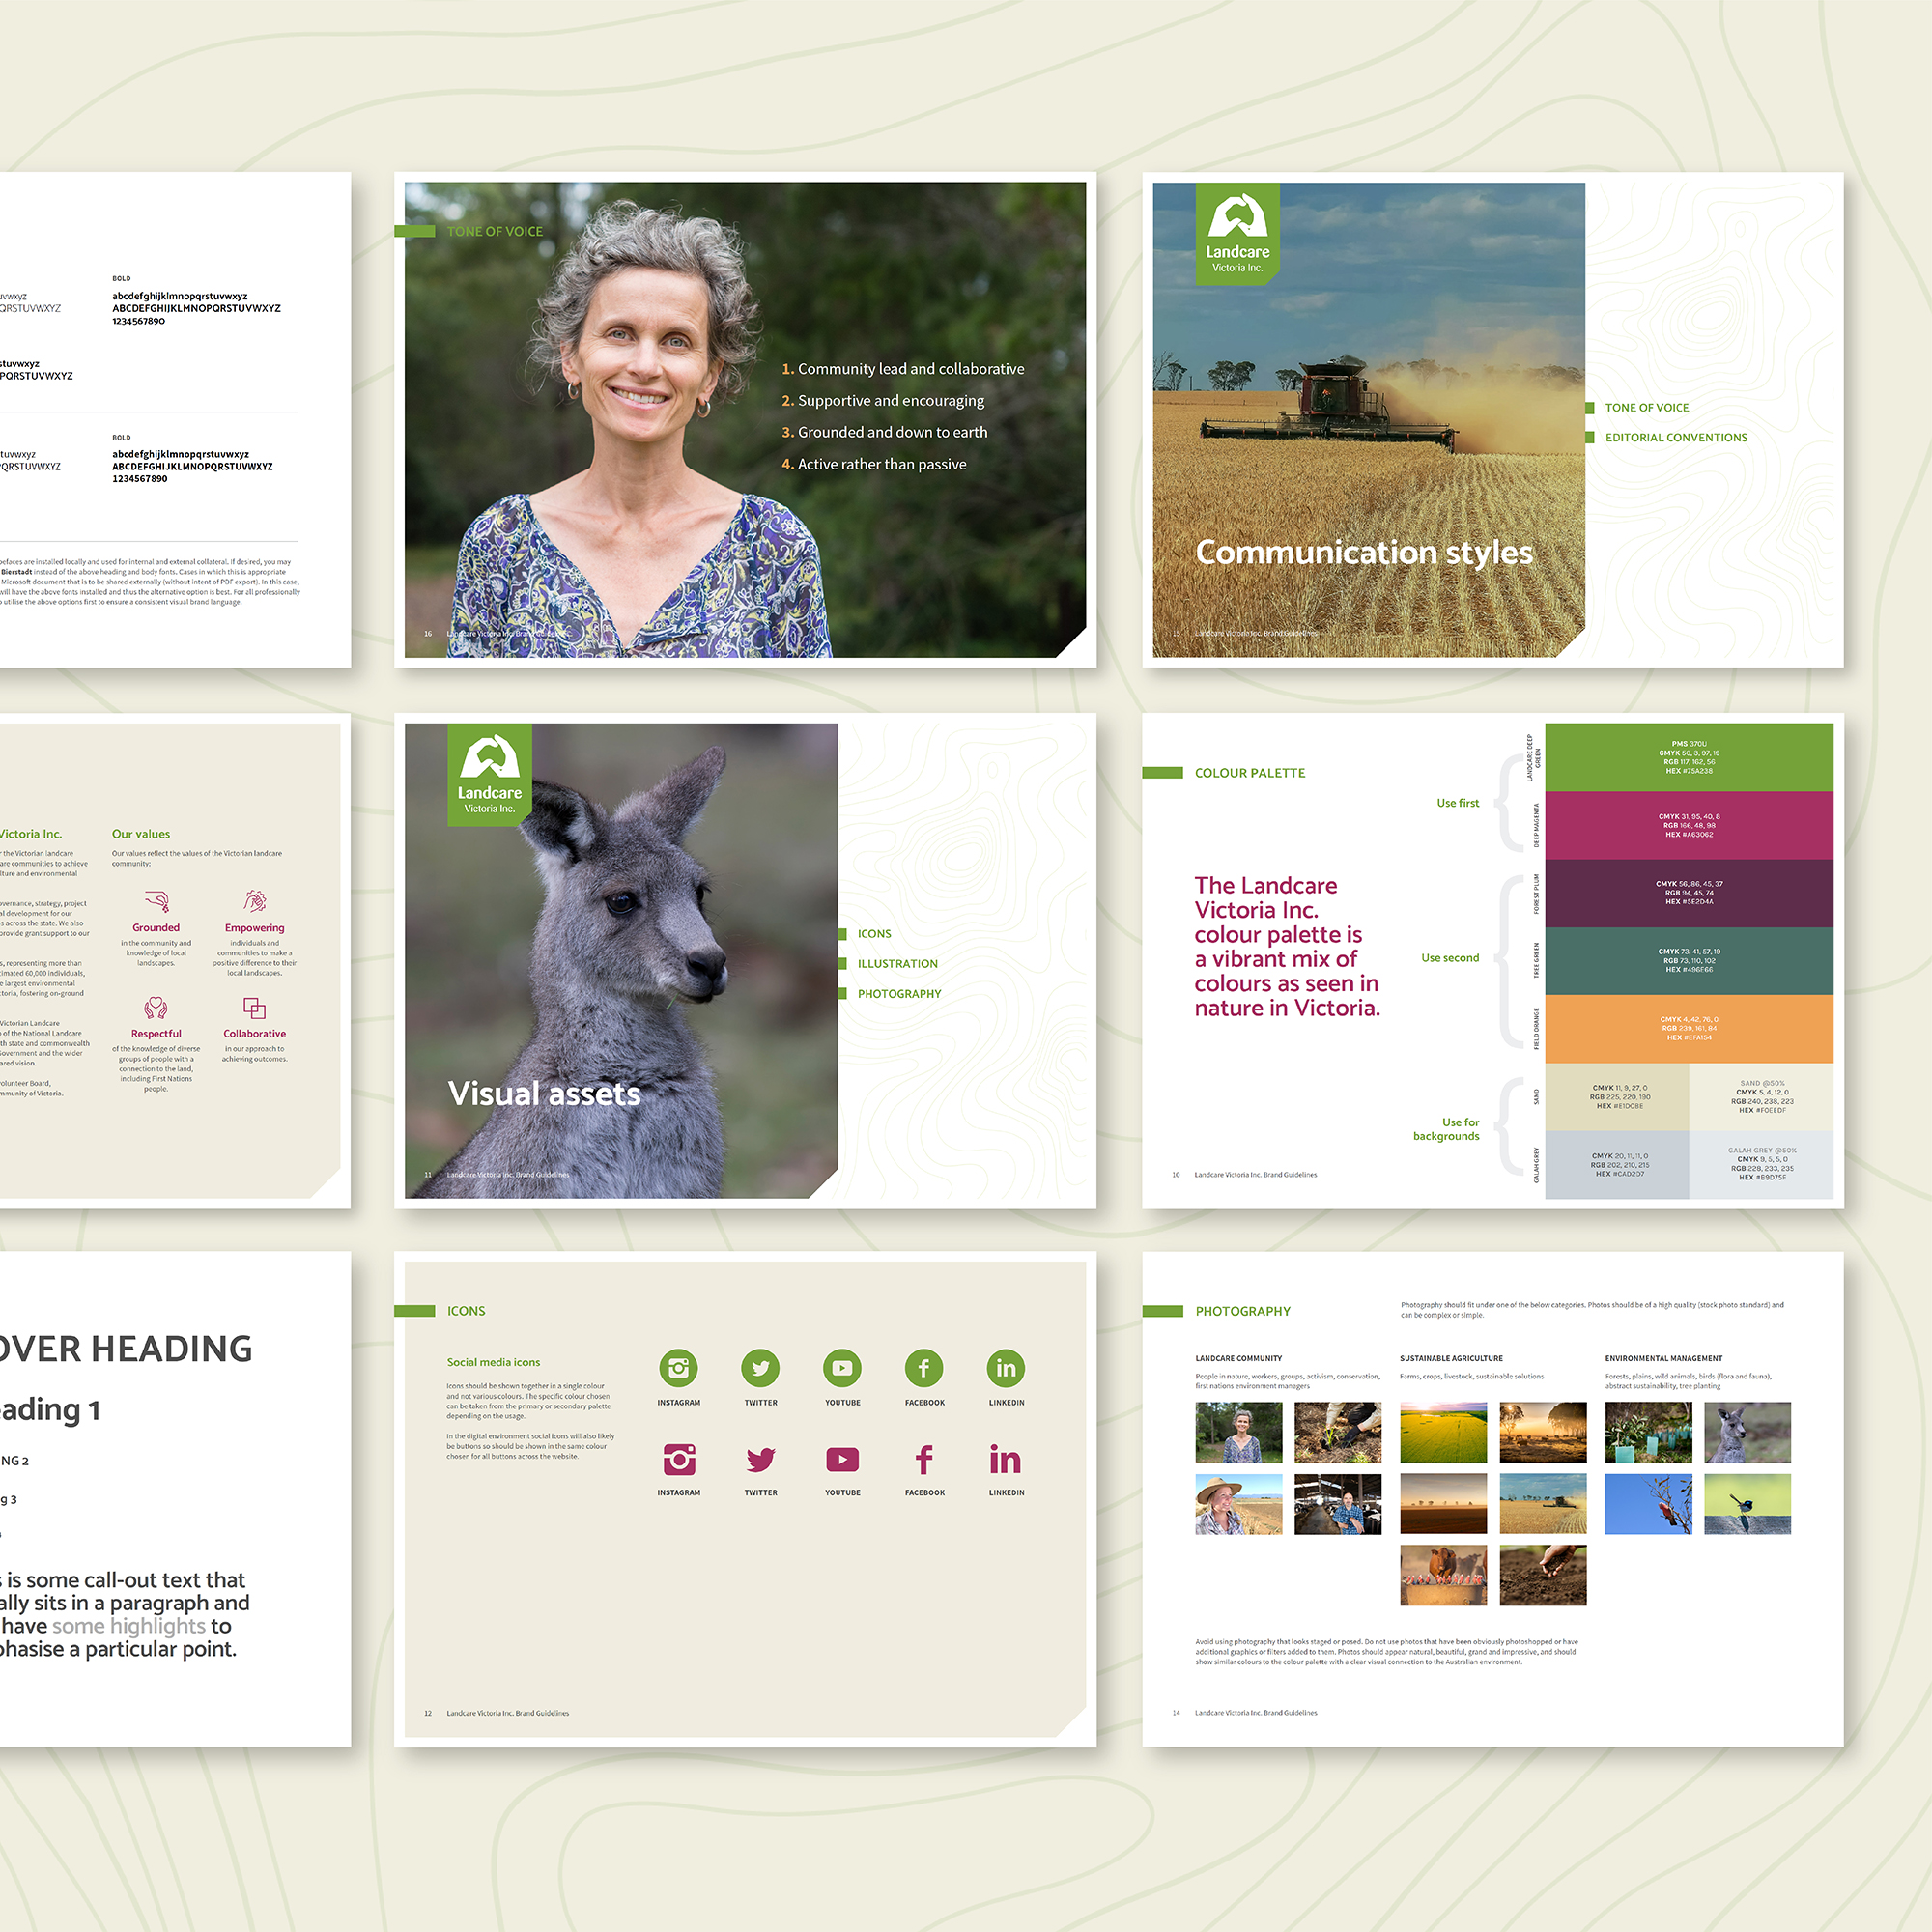 Mockup of various pages from Landcare Victoria's brand guidelines document in full colour (tile 2)